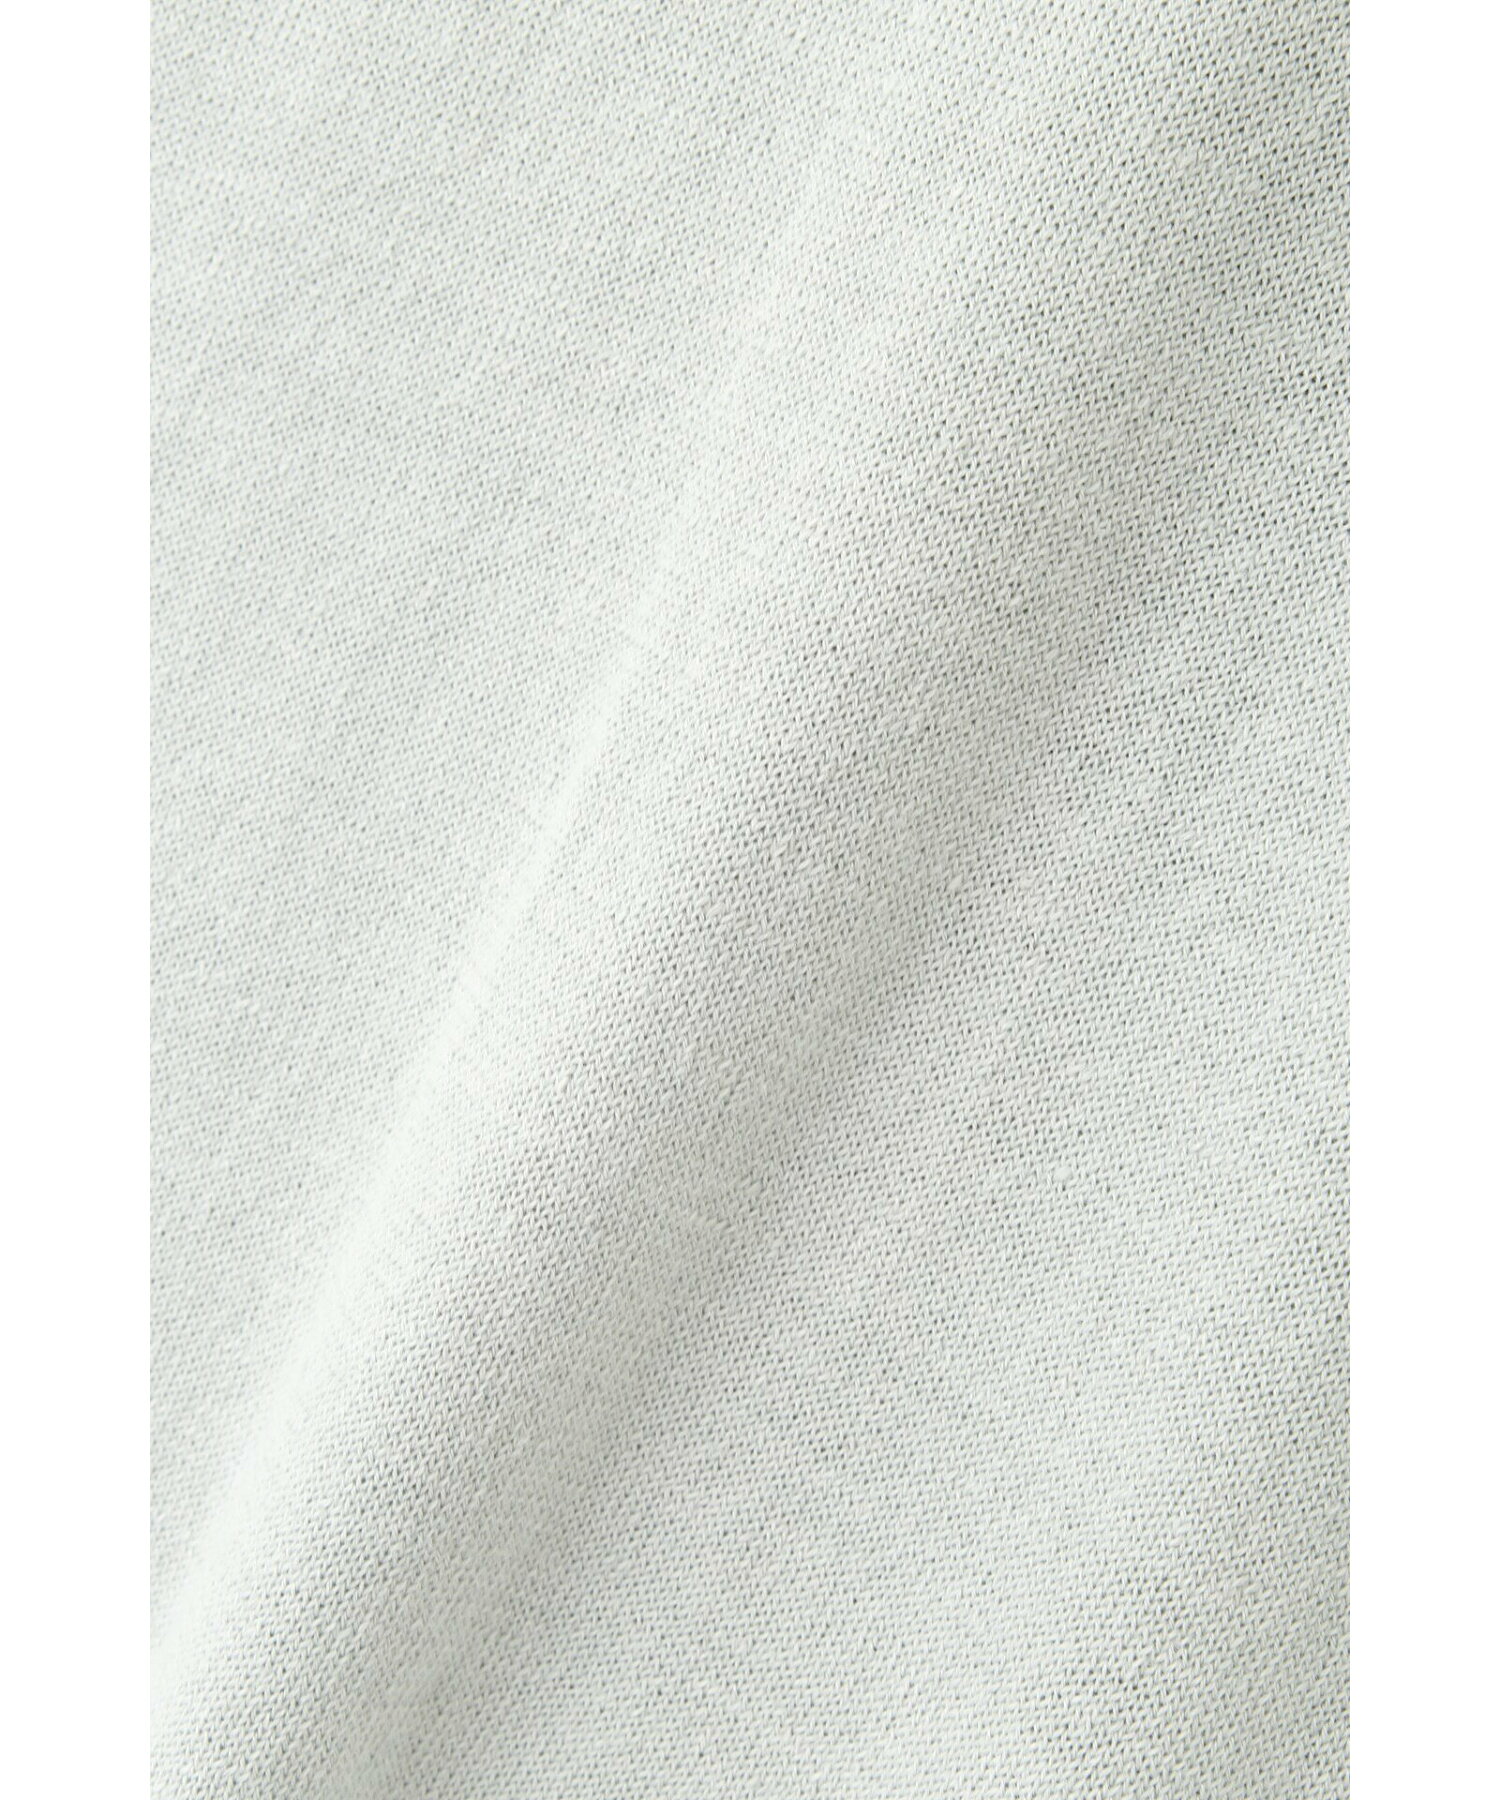 TWISTED LINEN COTTON